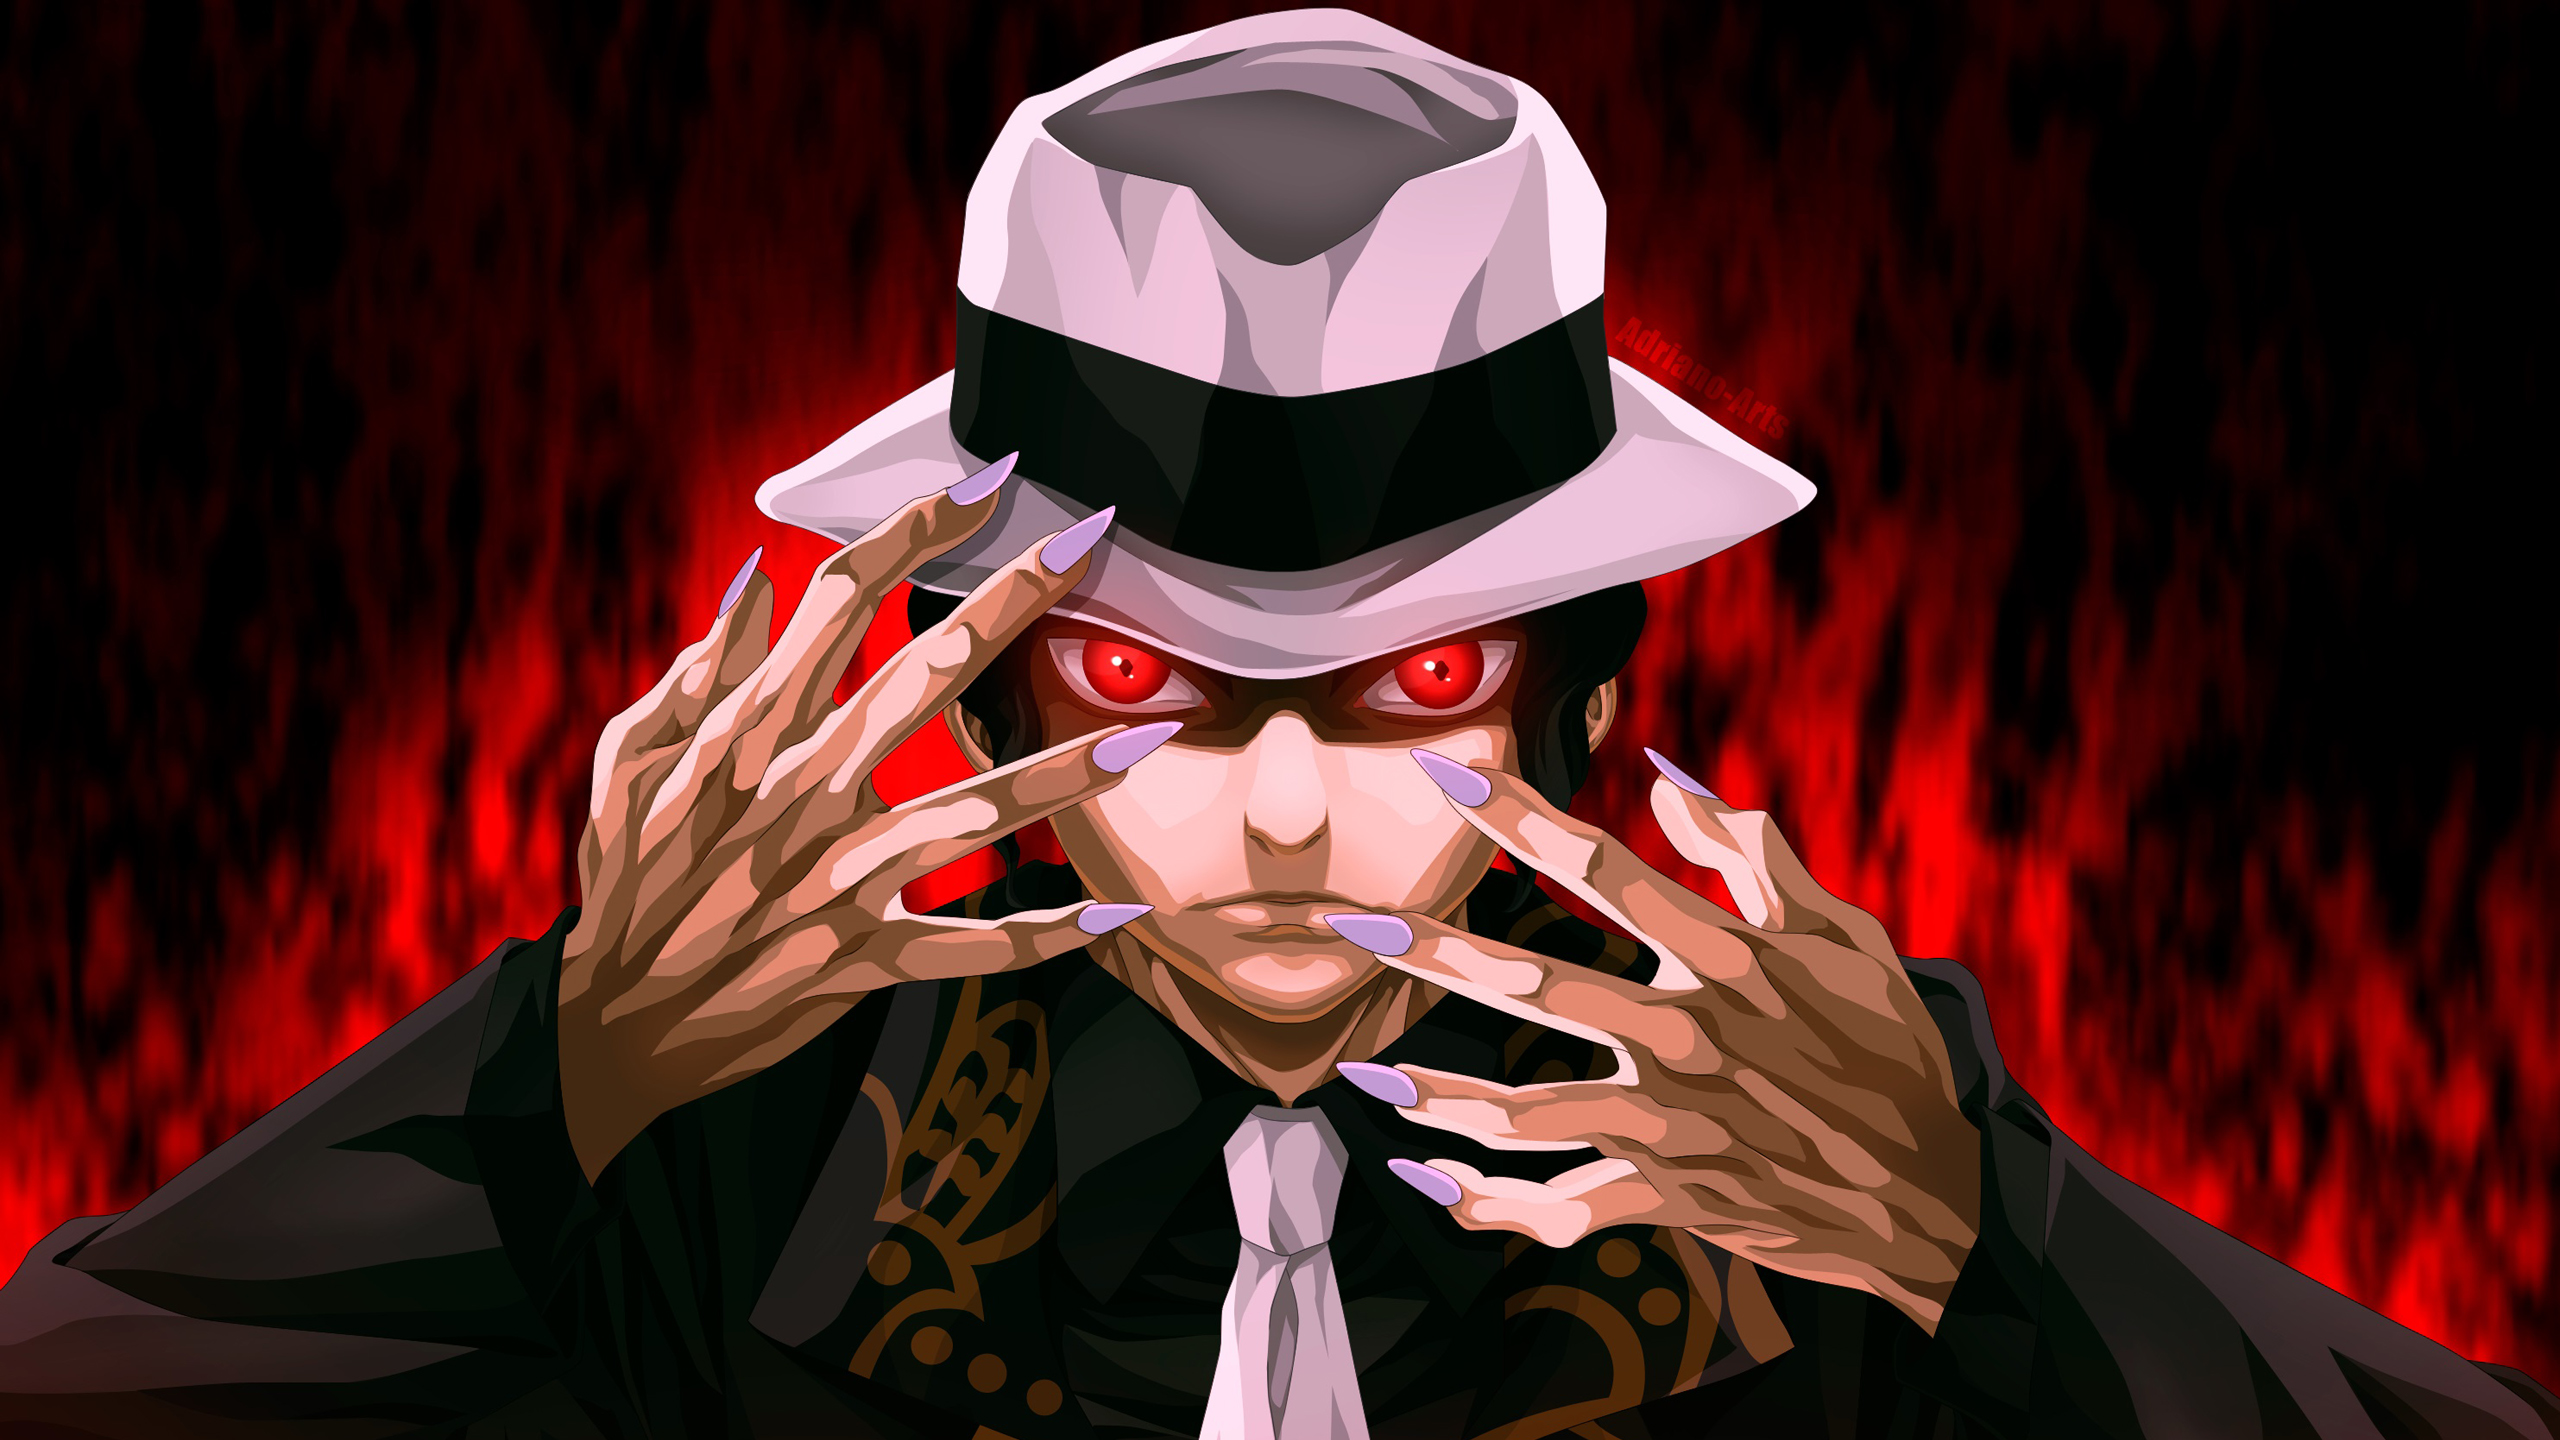 Demon Slayer Muzan Kibutsuji With Red Eyes And Sharp Nails With Black Wallpaper And Red Fire HD